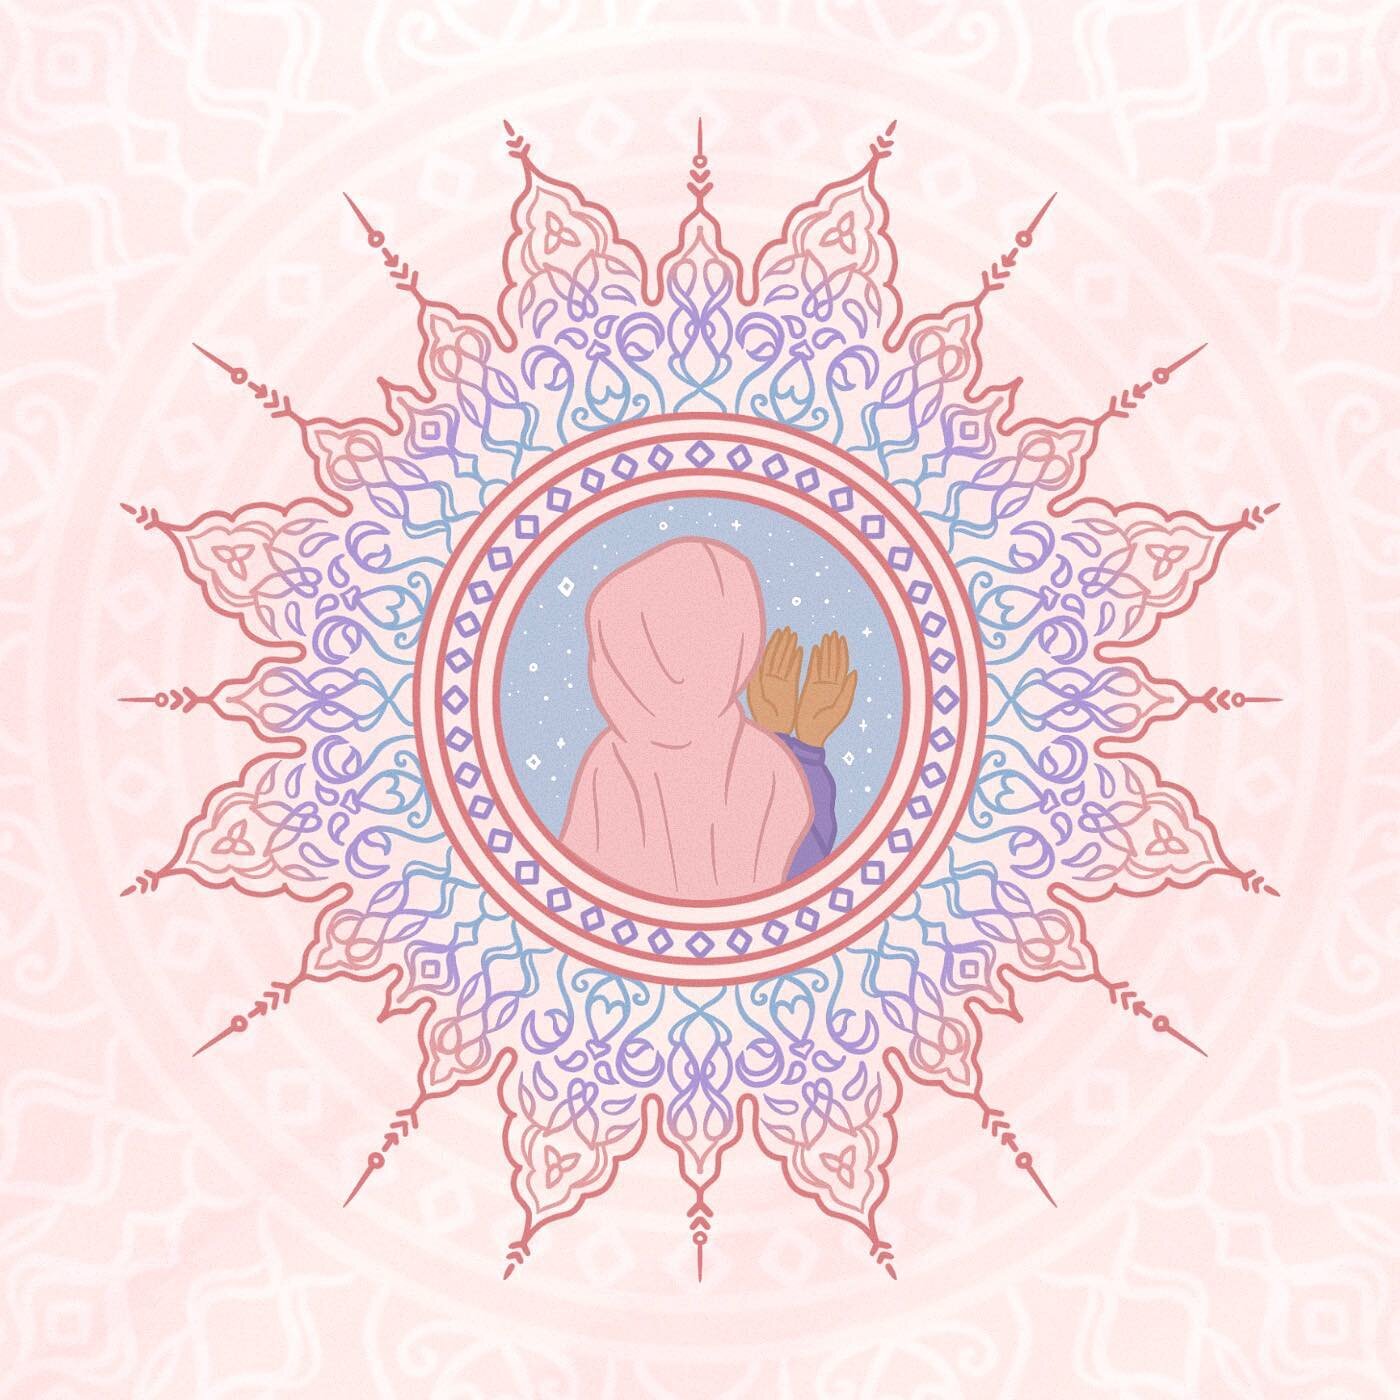 🌸 Prayer will bring you peace 🌸

A belated Eid Mubarak lovely people! I hope you had a joyous and blessed day and gained some peace and spiritual healing from the blessed month of Ramadan Insha&rsquo;Allah!

Fun fact about this piece. I&rsquo;d act